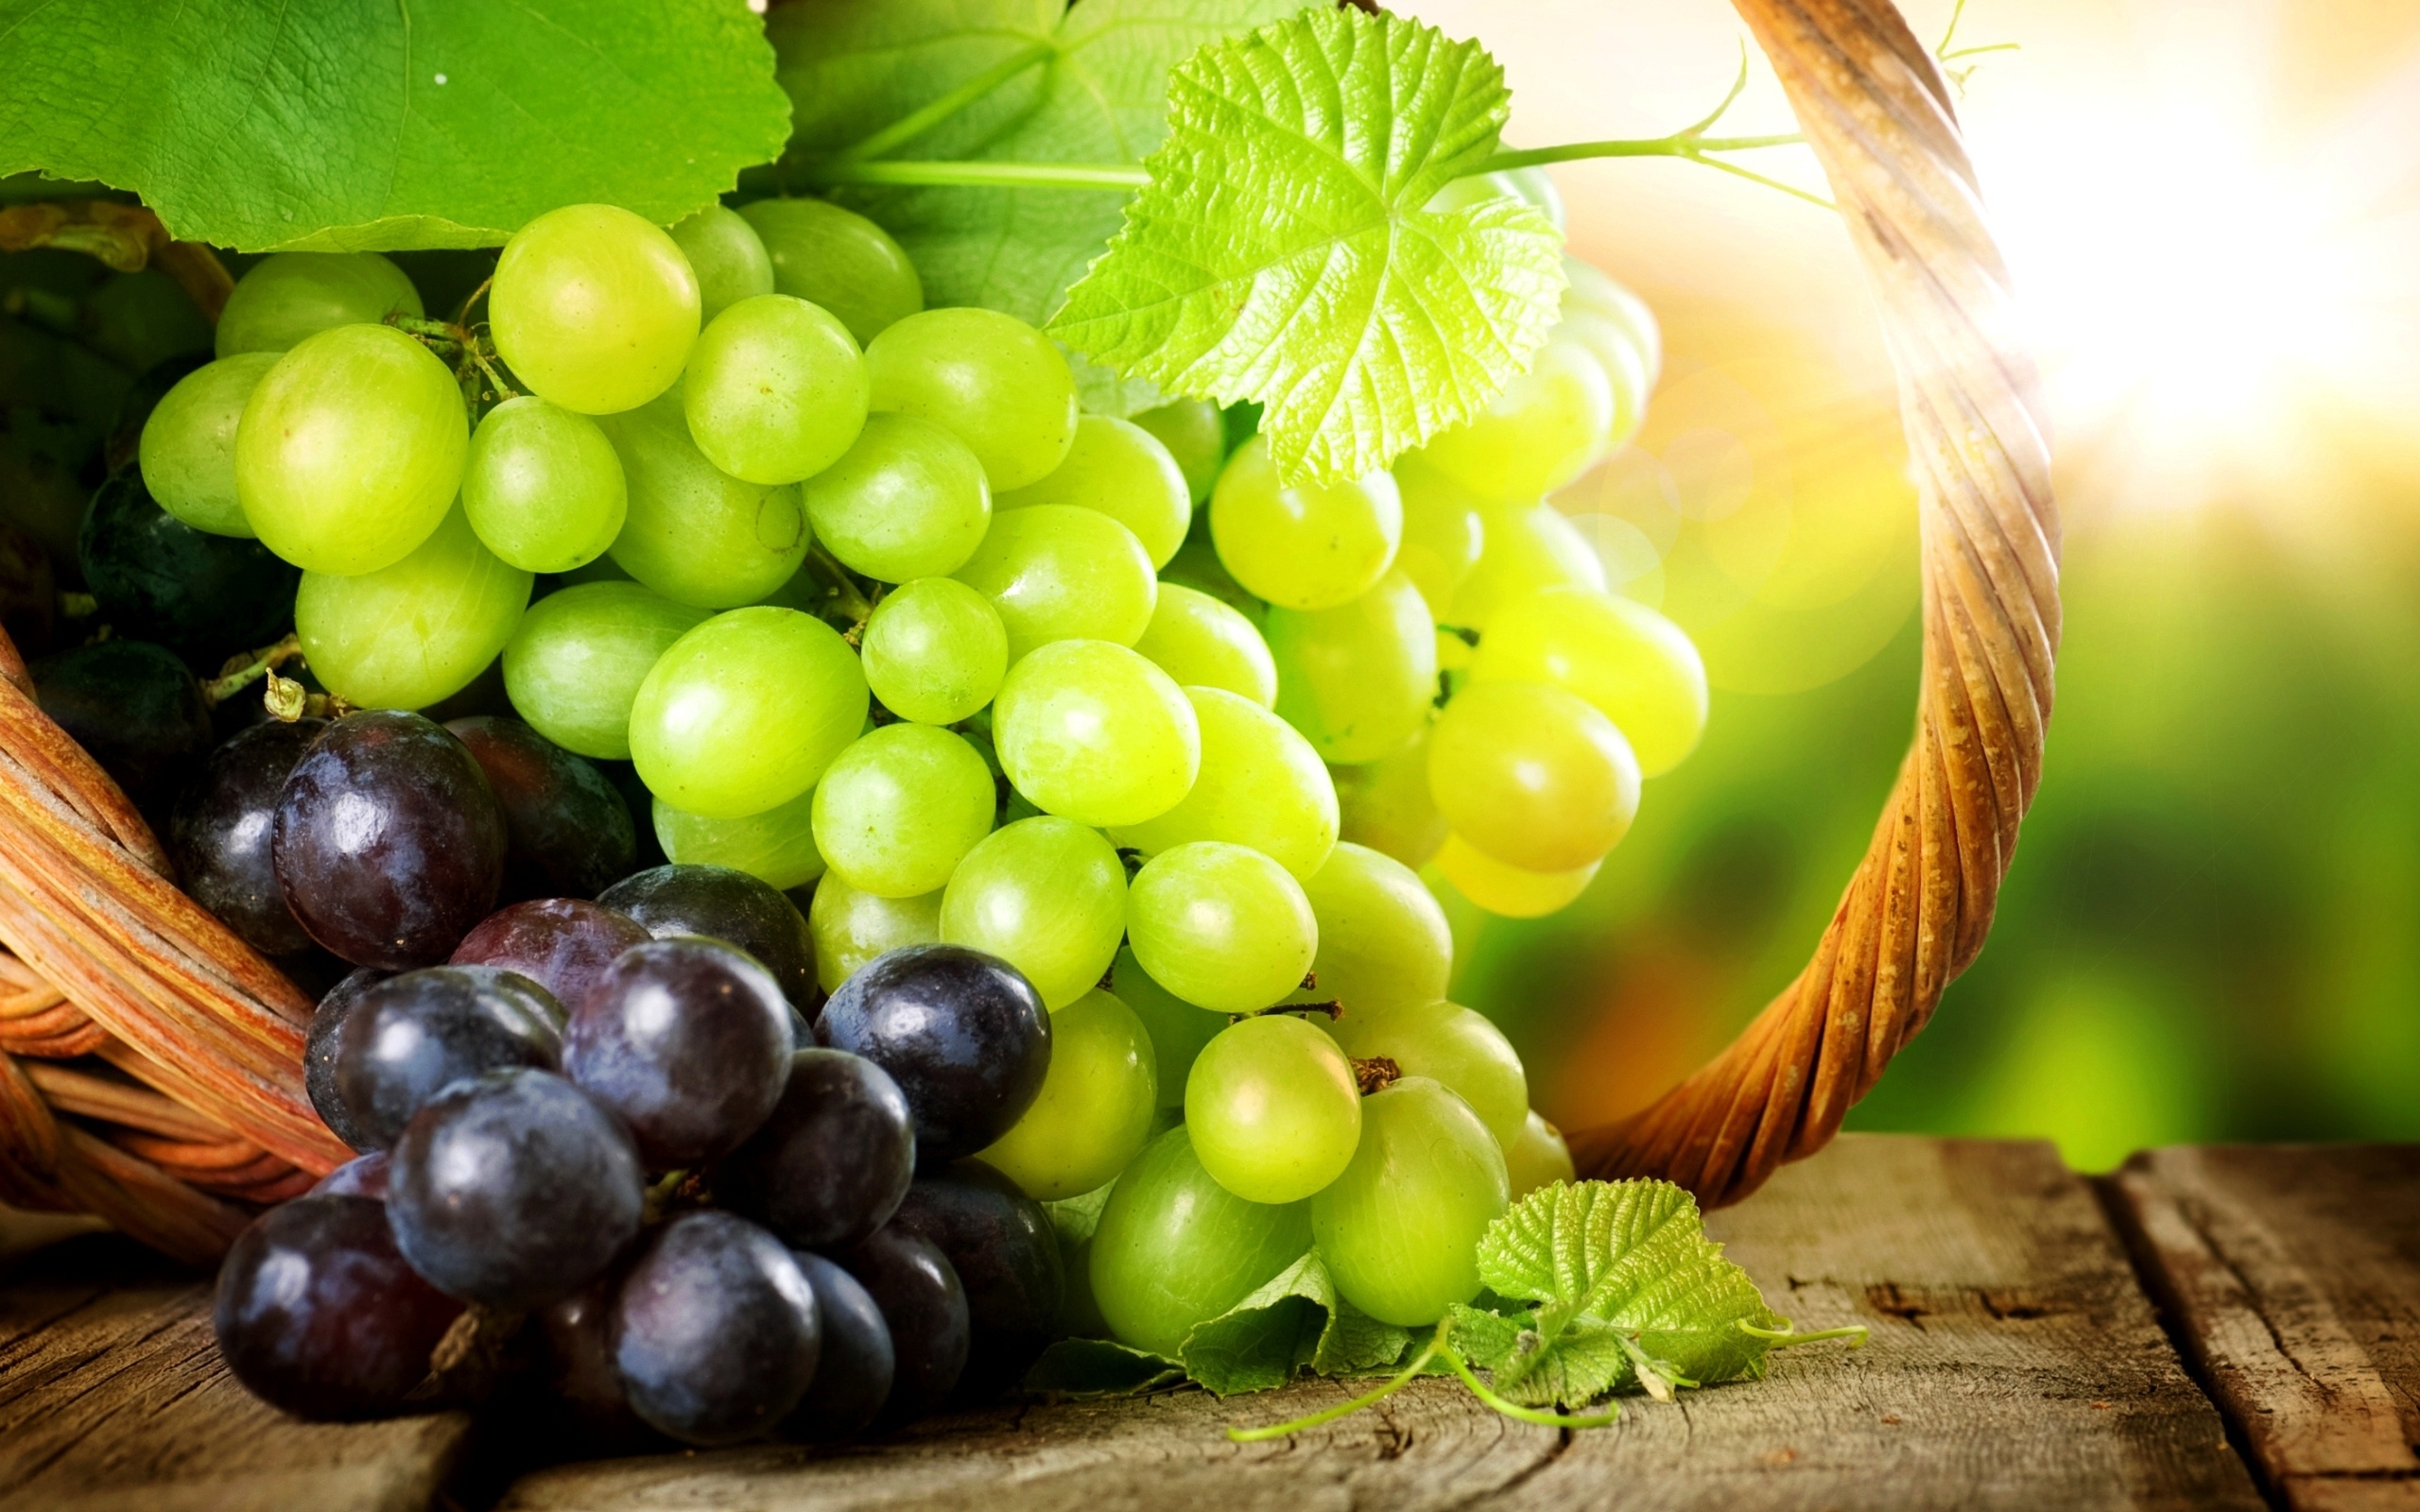 Grapes: A good source of fiber, potassium, and a range of vitamins and other minerals. 2560x1600 HD Background.